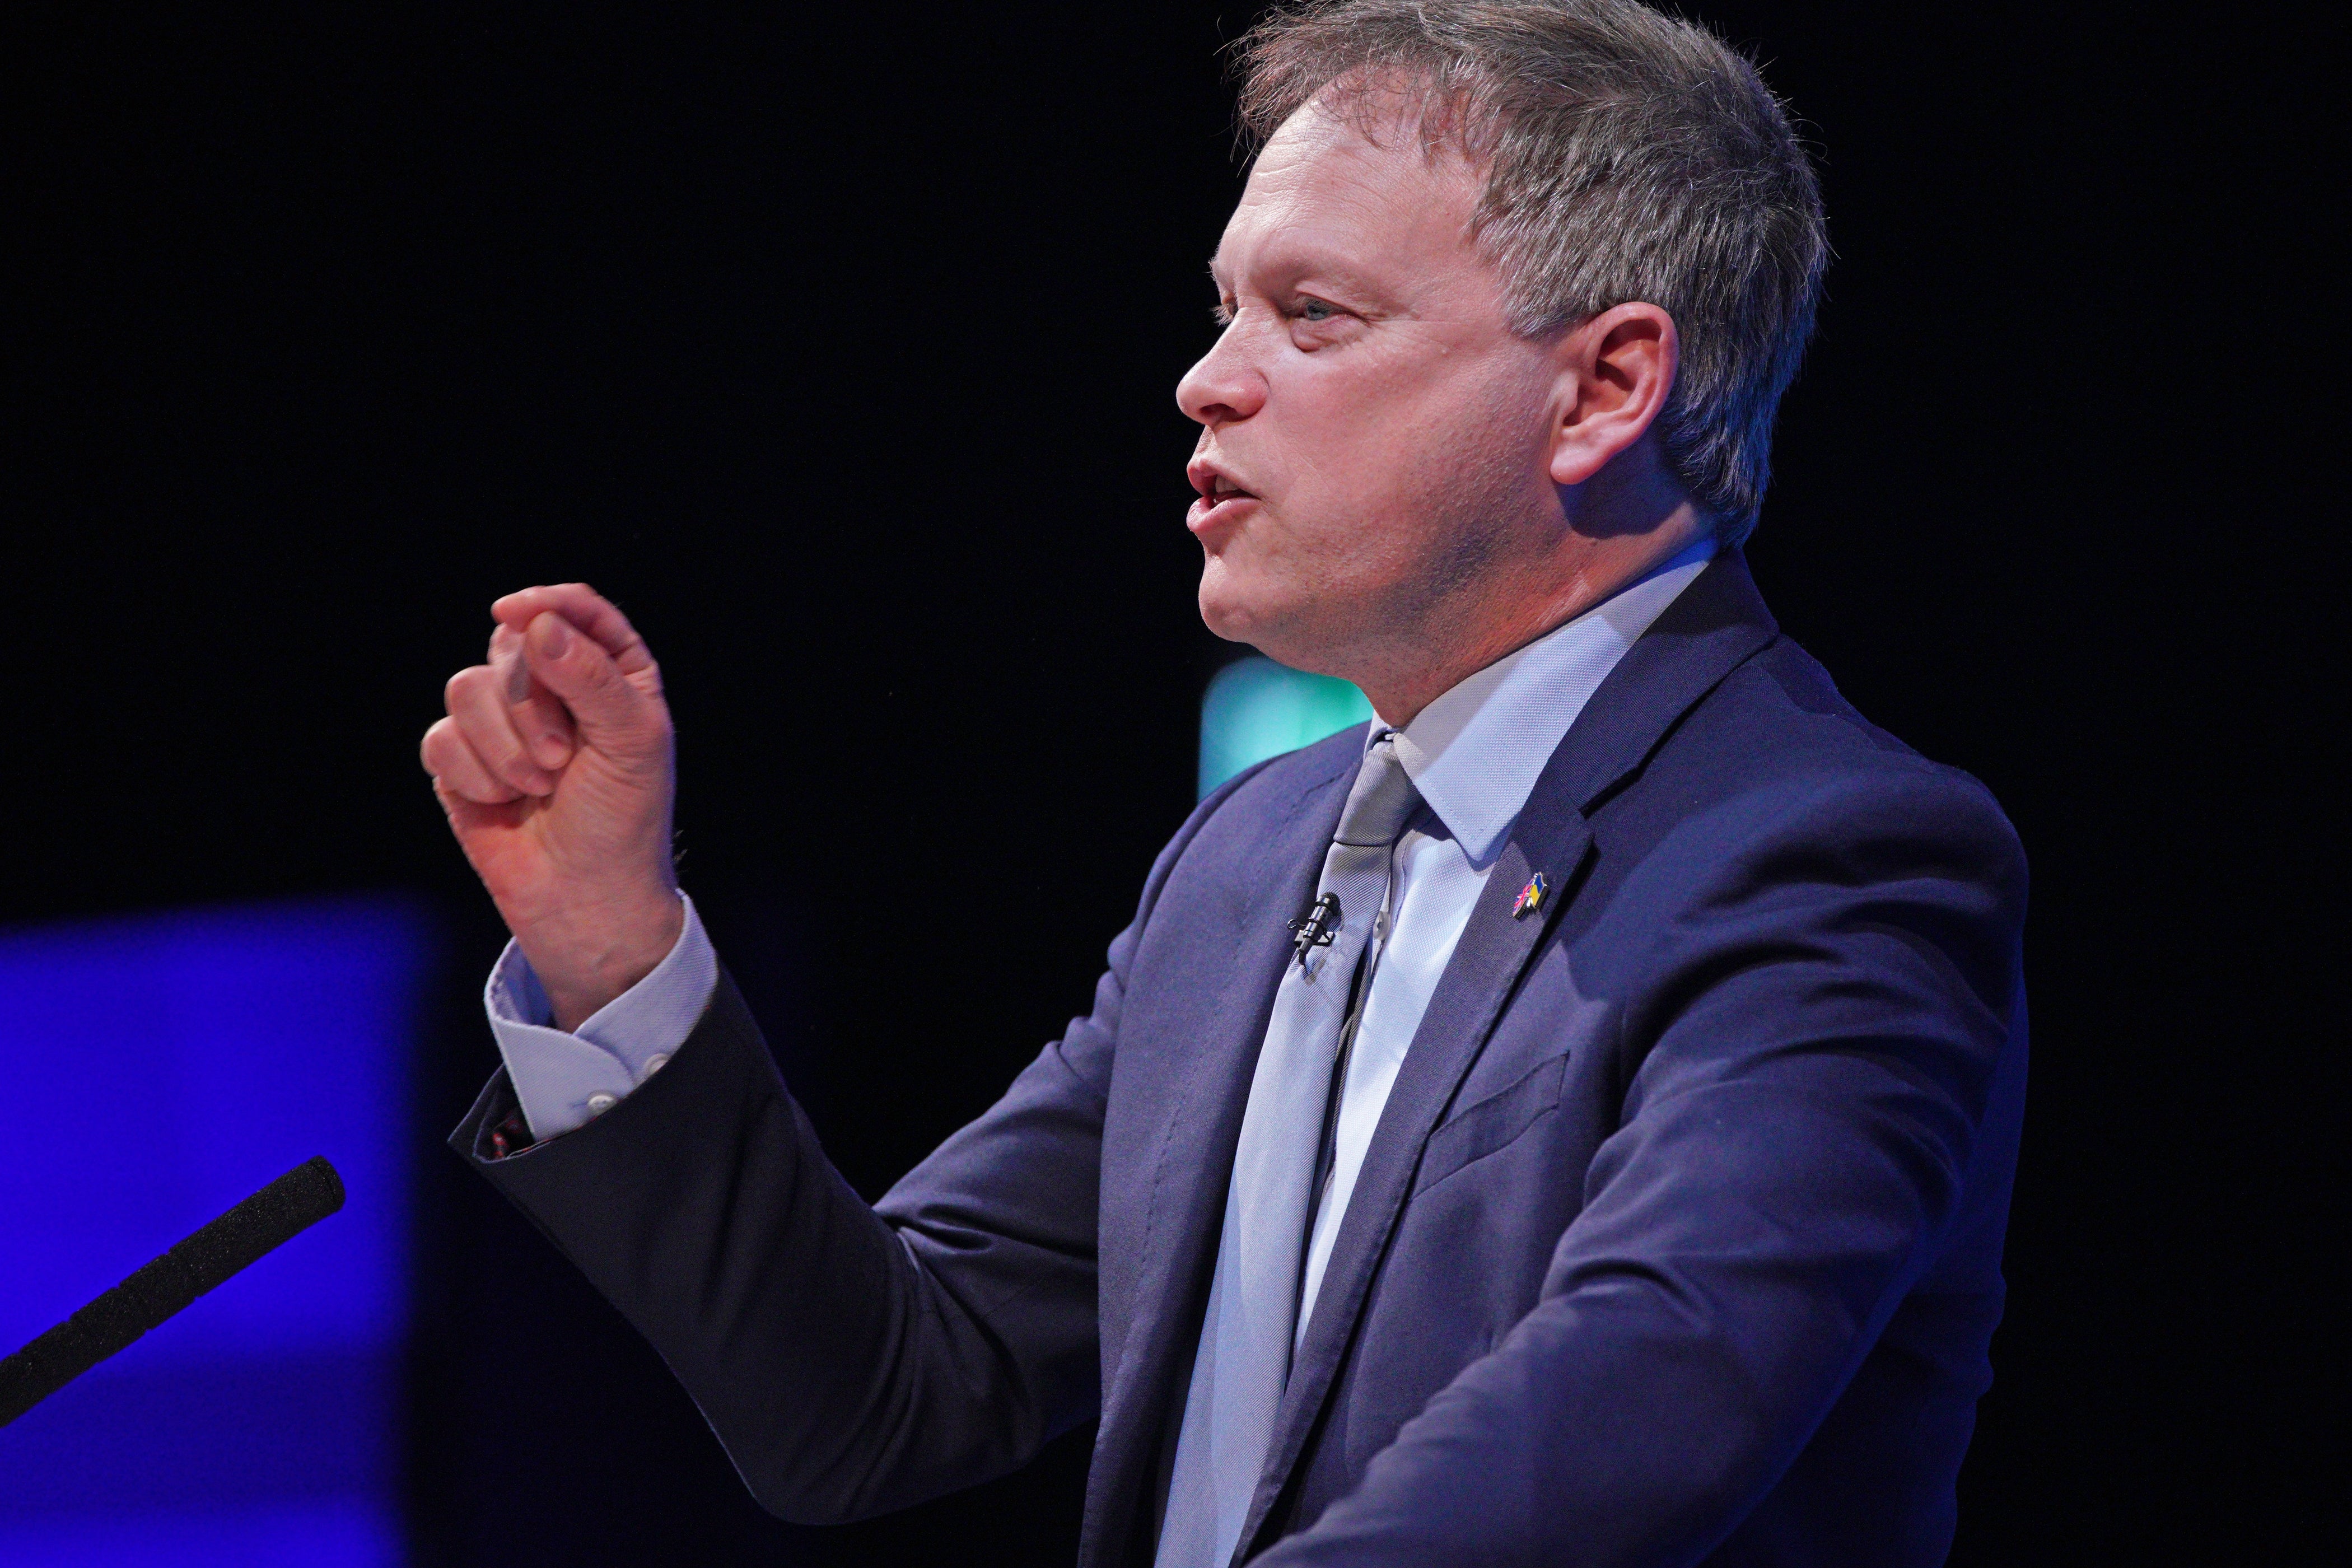 Transport Secretary Grant Shapps has said the chief executive of P&O Ferries should resign (Peter Byrne/PA)